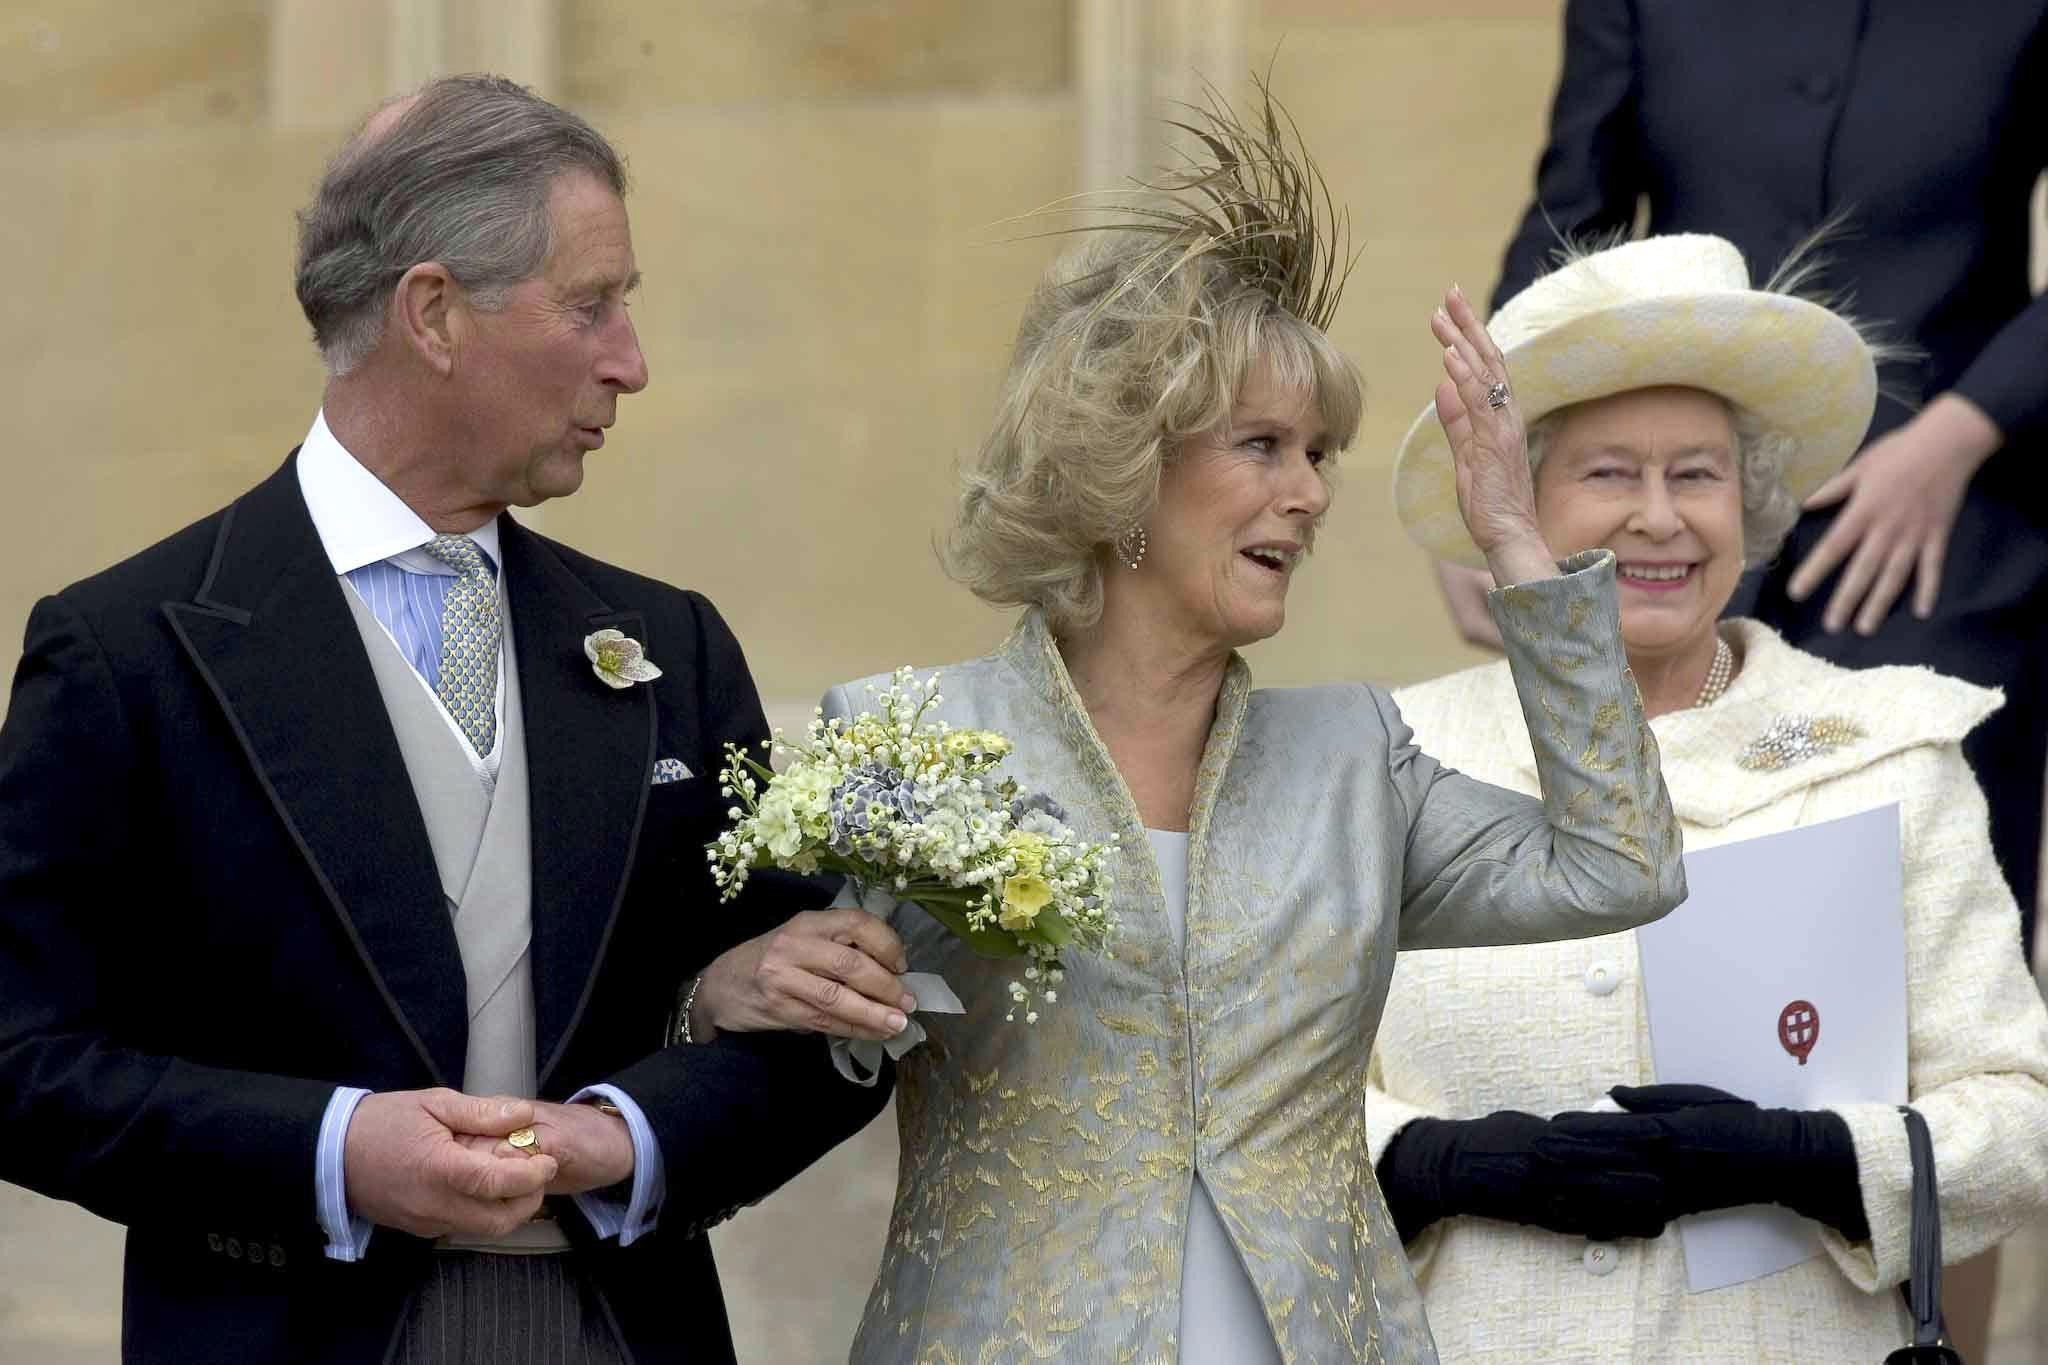 The Prince of Wales and the Duchess of Cornwall with the Queen after the blessing of their marriage in 2005